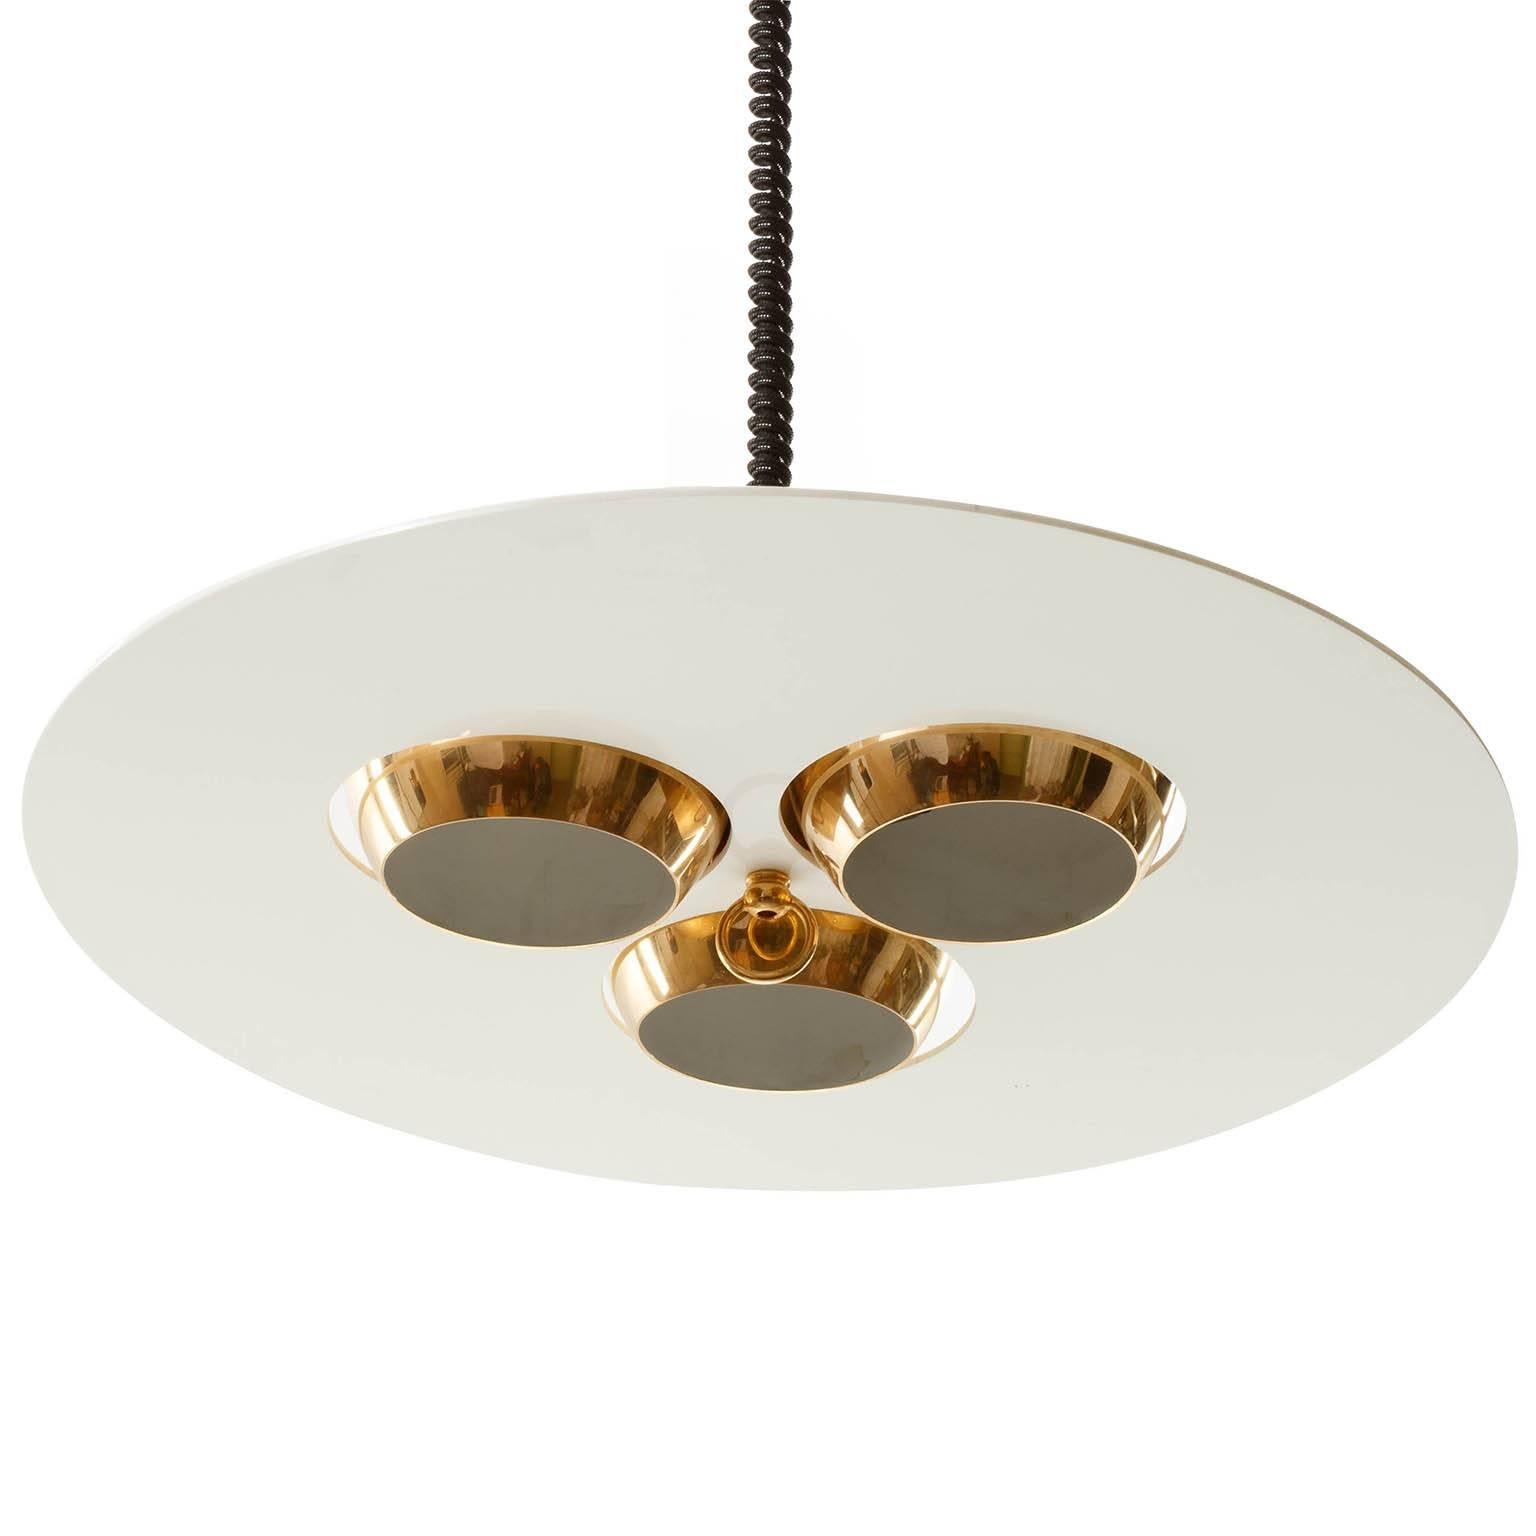 A high adjustable Italian pendant light manufactured in Midcentury in 1970s.
It is in the style of the Ettore Sottsass '19022 Lampros' chandelier for Stilnovo.
The three brass globe lamp shades can be rotated and positioned in different ways.